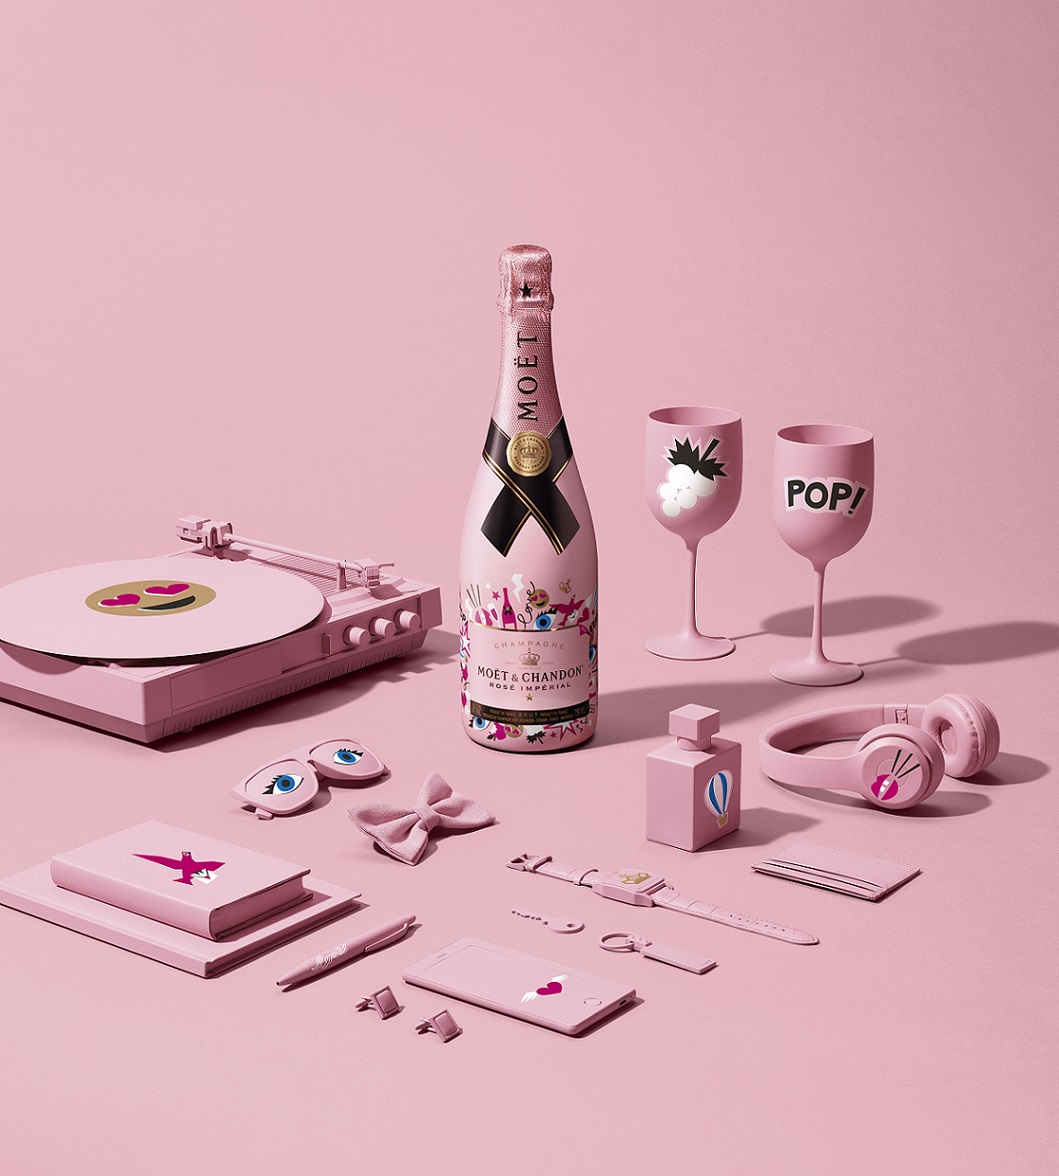 FOR THE LOVE OF ROSÉ – MOËT & CHANDON'S